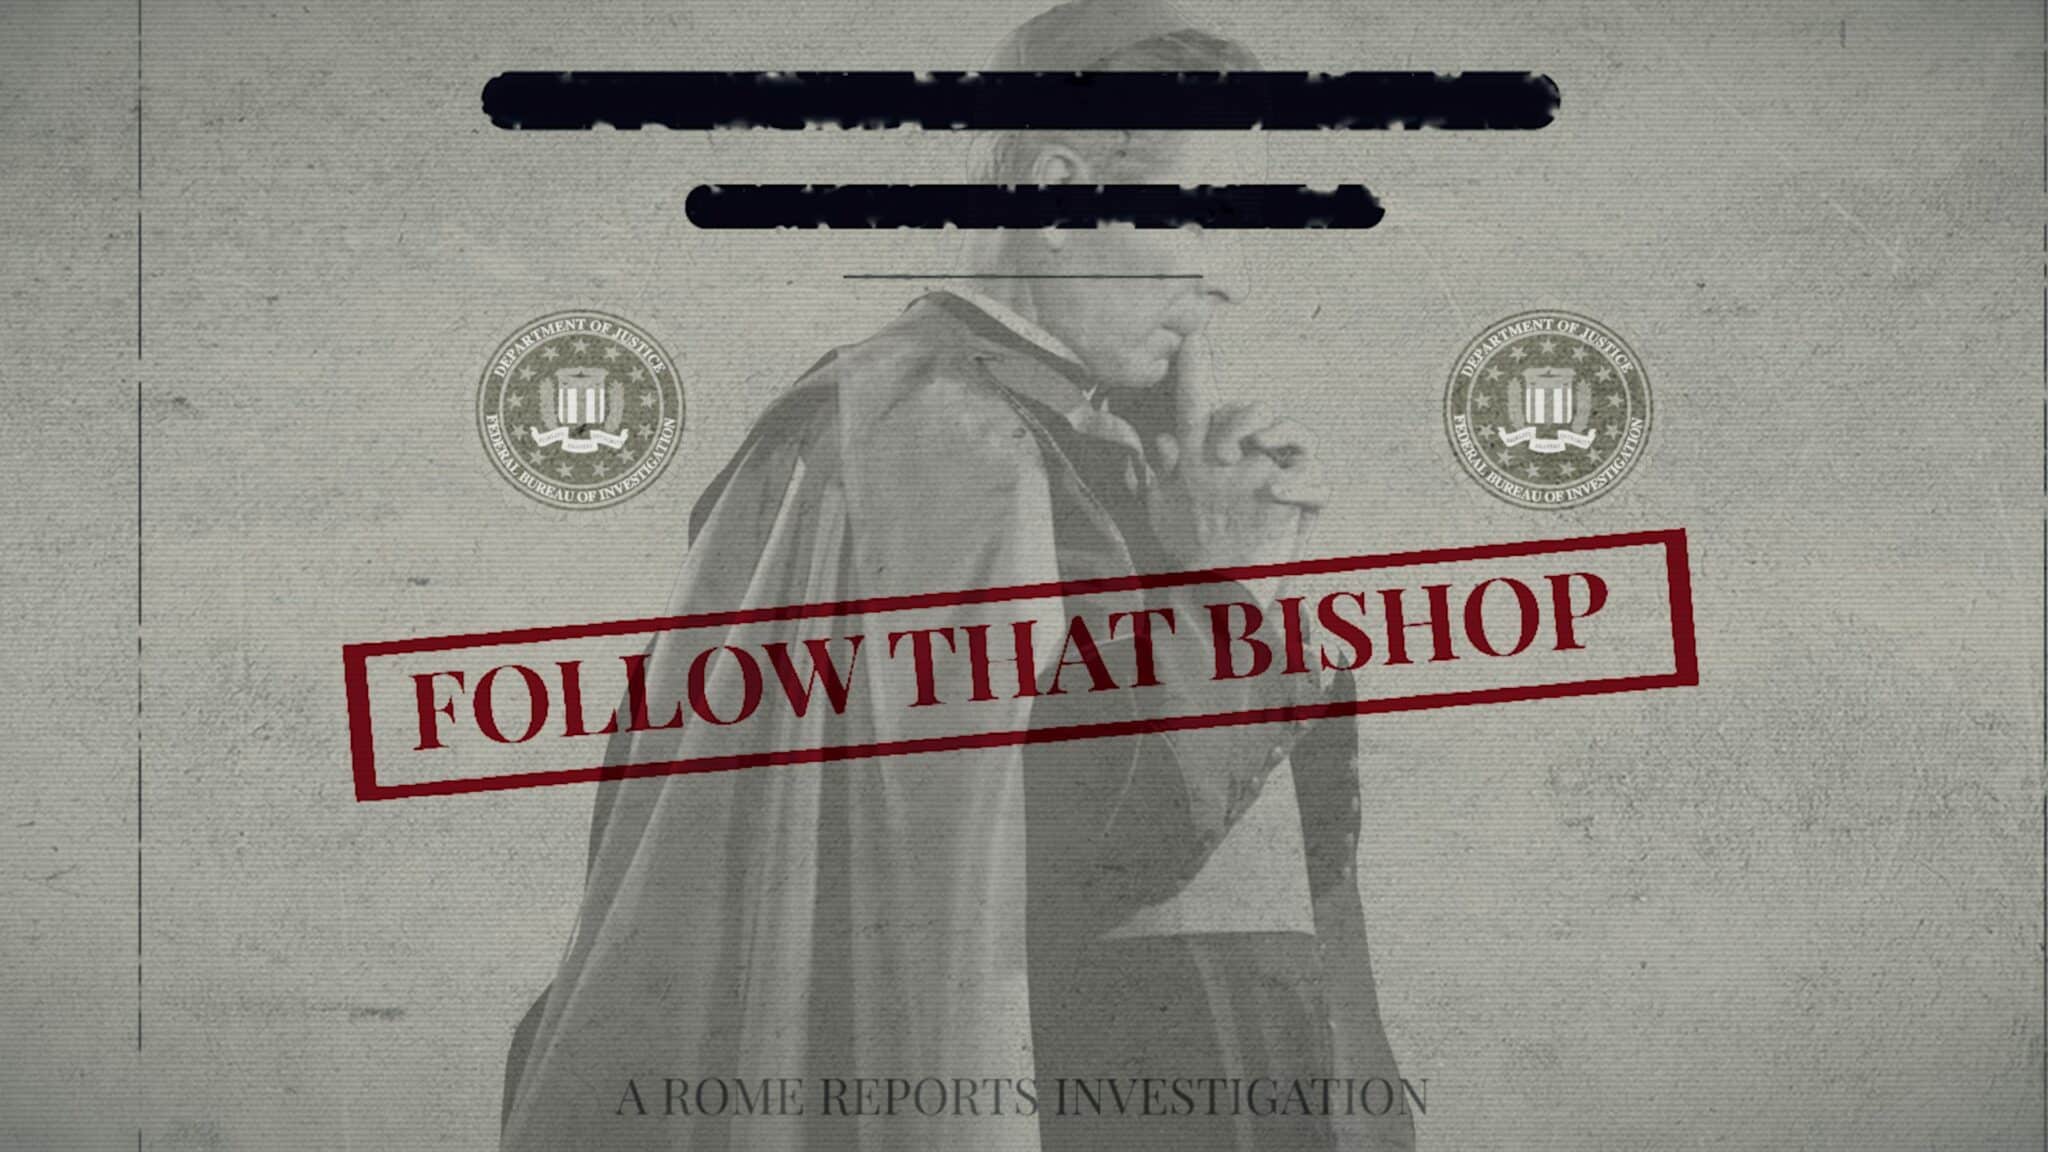 This image is part of the promotional material for "Follow That Bishop," a 28-minute documentary reporting on the FBI file kept on Archbishop Fulton J. Sheen. (OSV News photo/courtesy Rome Reports)